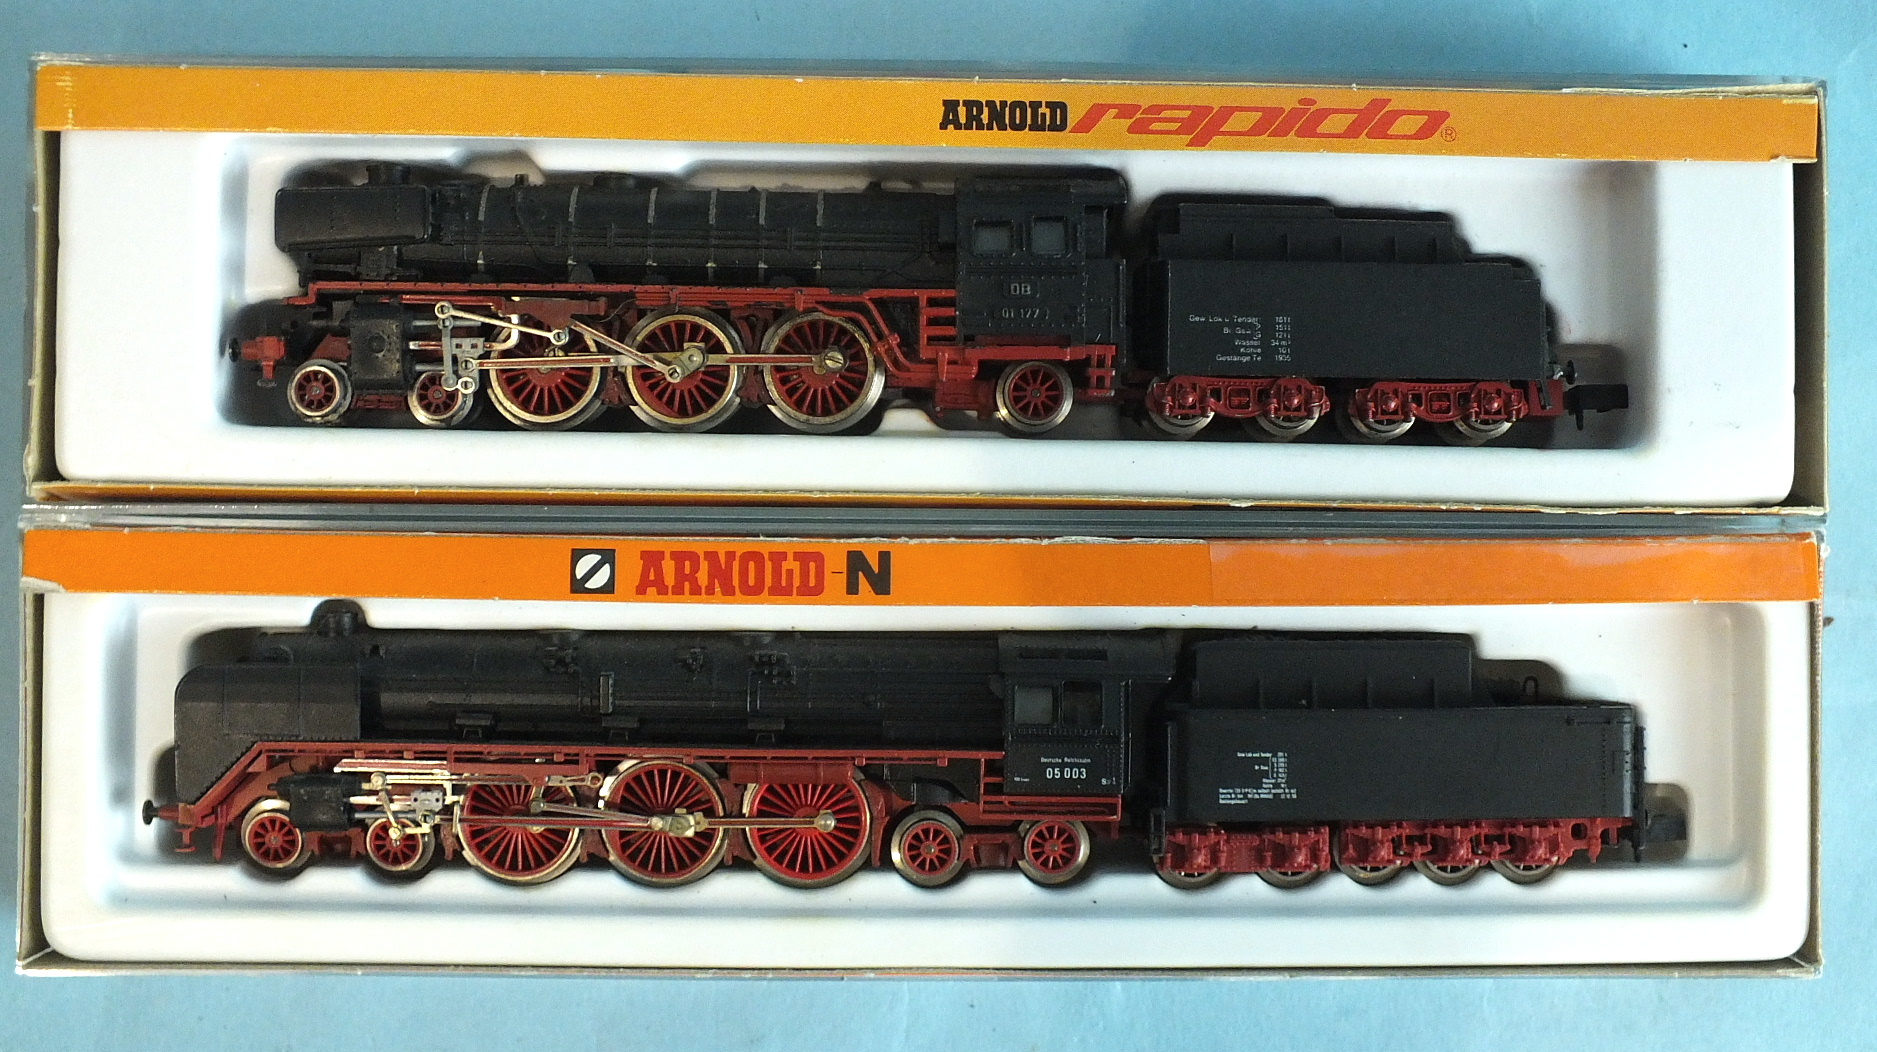 Arnold, N gauge, 2216 4-6-4 locomotive and tender RN05003, boxed and 2210 4-6-2 DB locomotive and